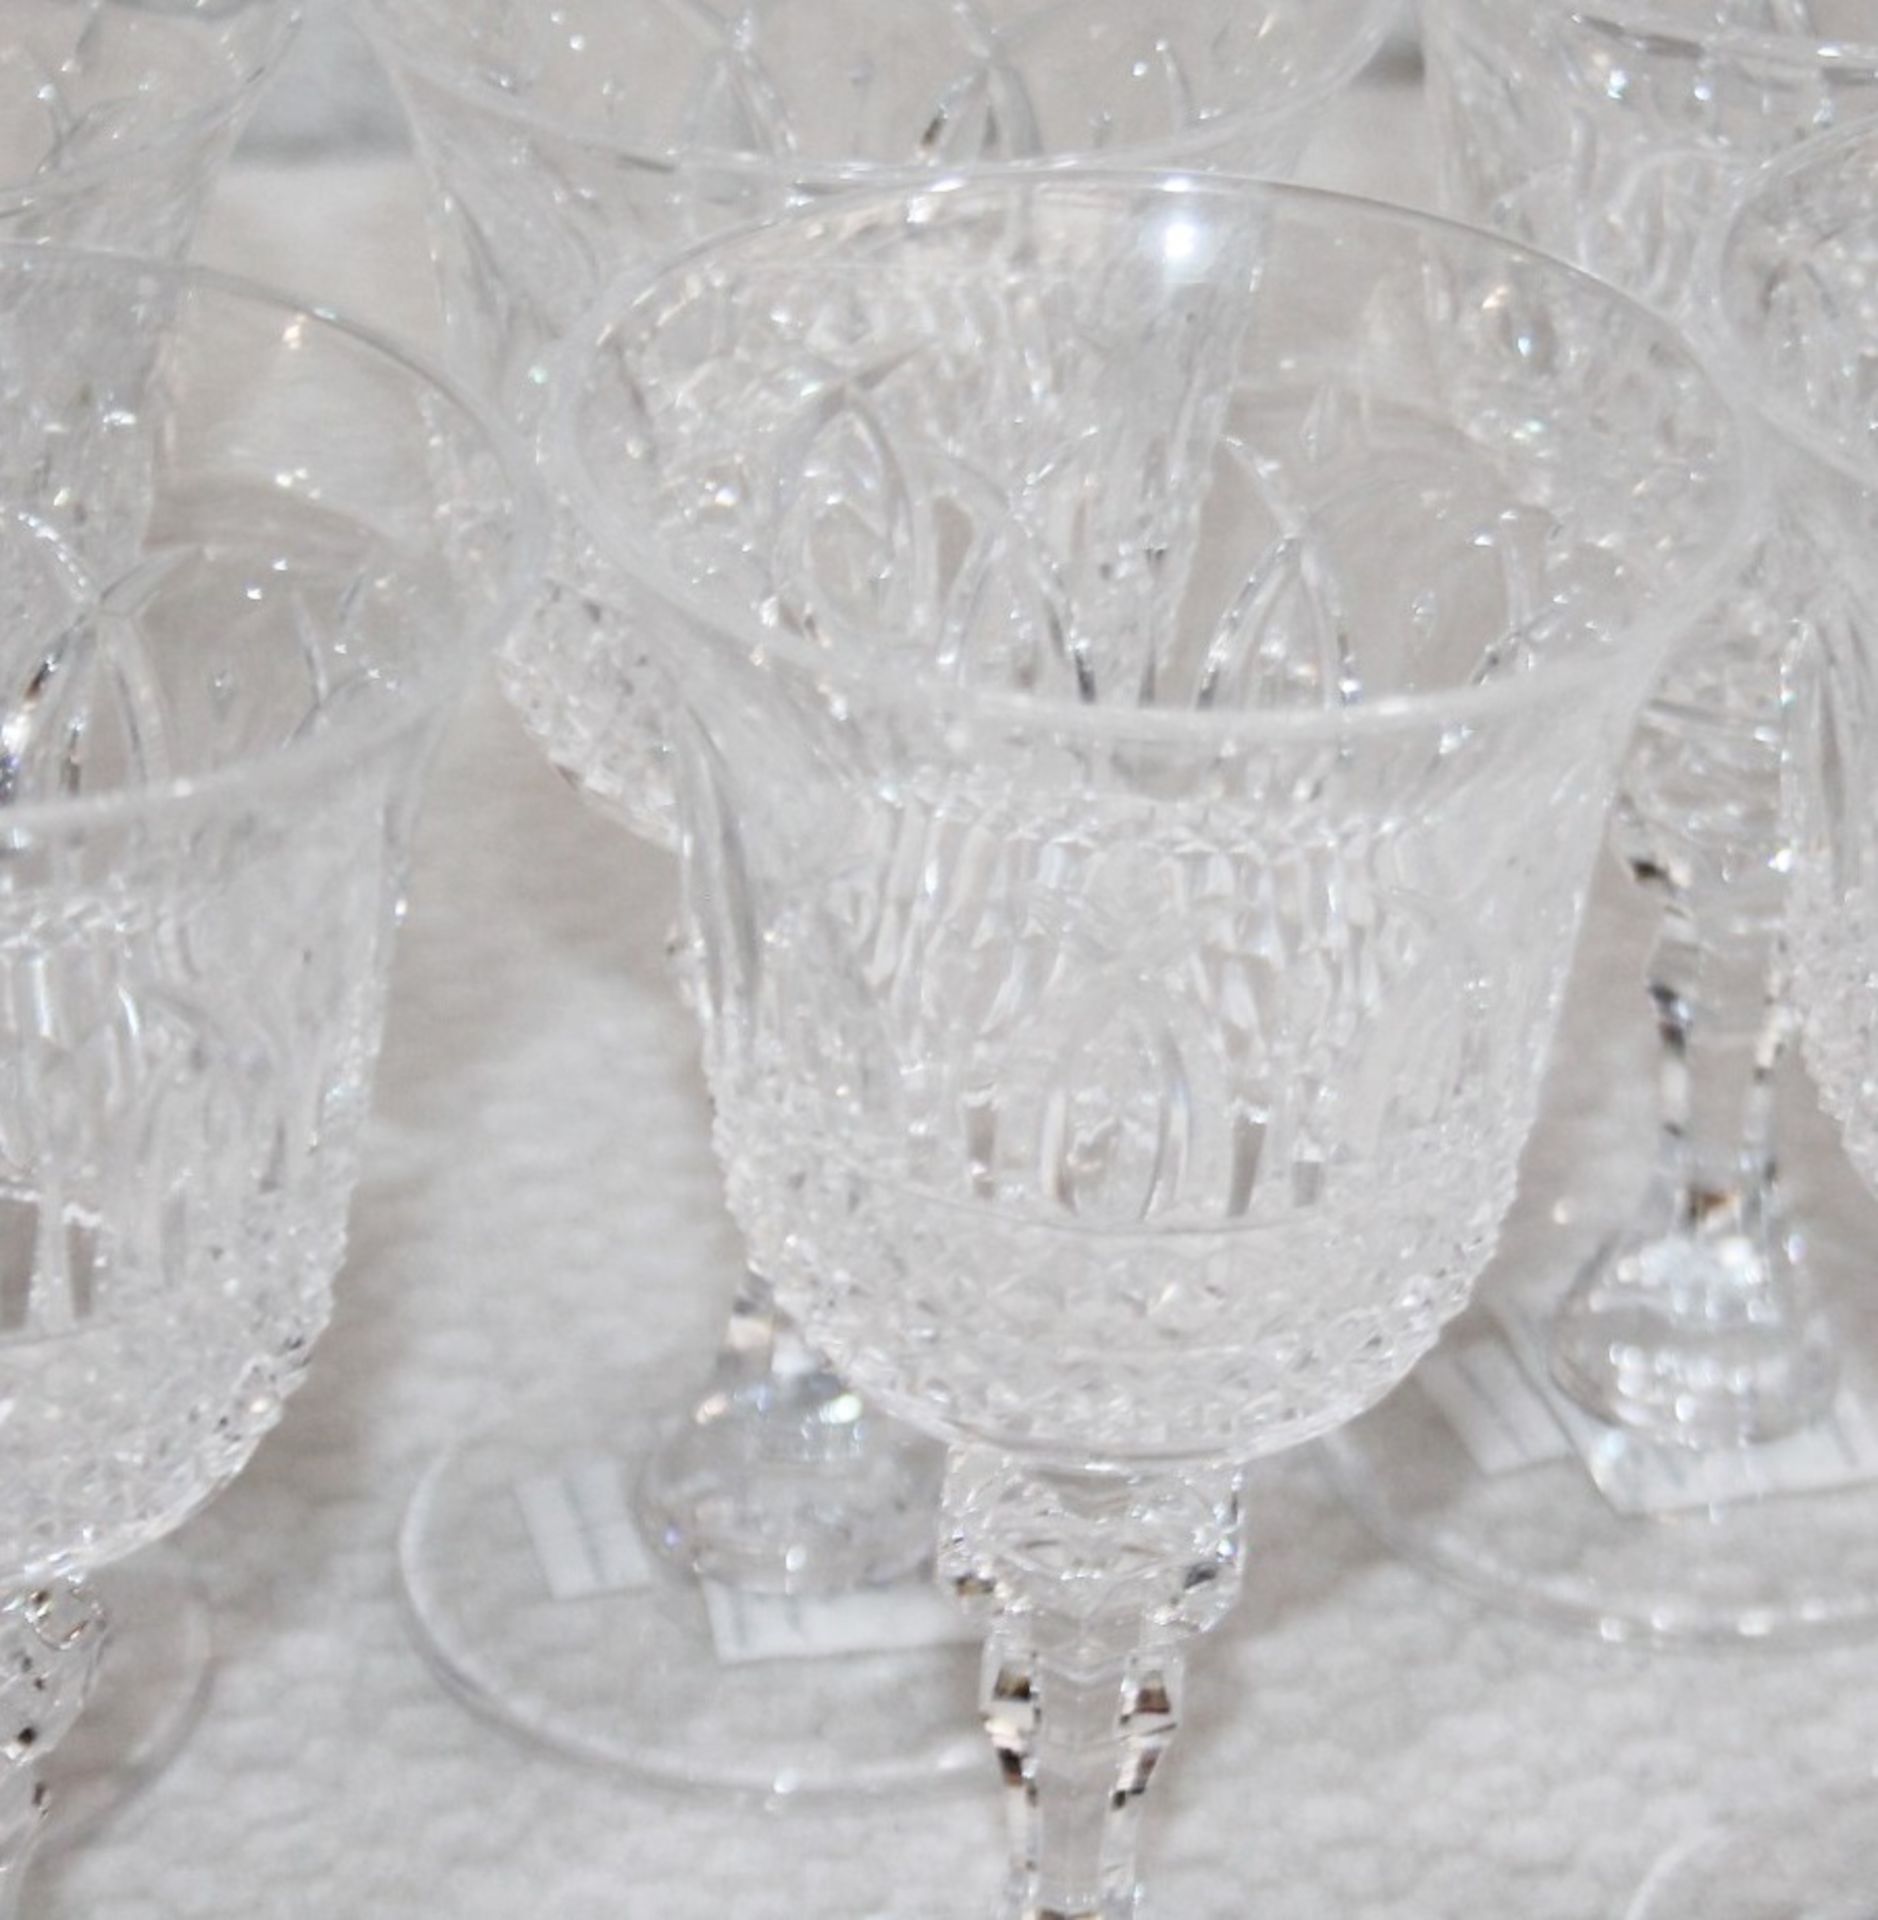 Set of 6 x MARIO LUCA GIUSTI 'Italia' Clear Synthetic Crystal Wine Goblets (180ml) - RRP £144.00 - Image 6 of 13